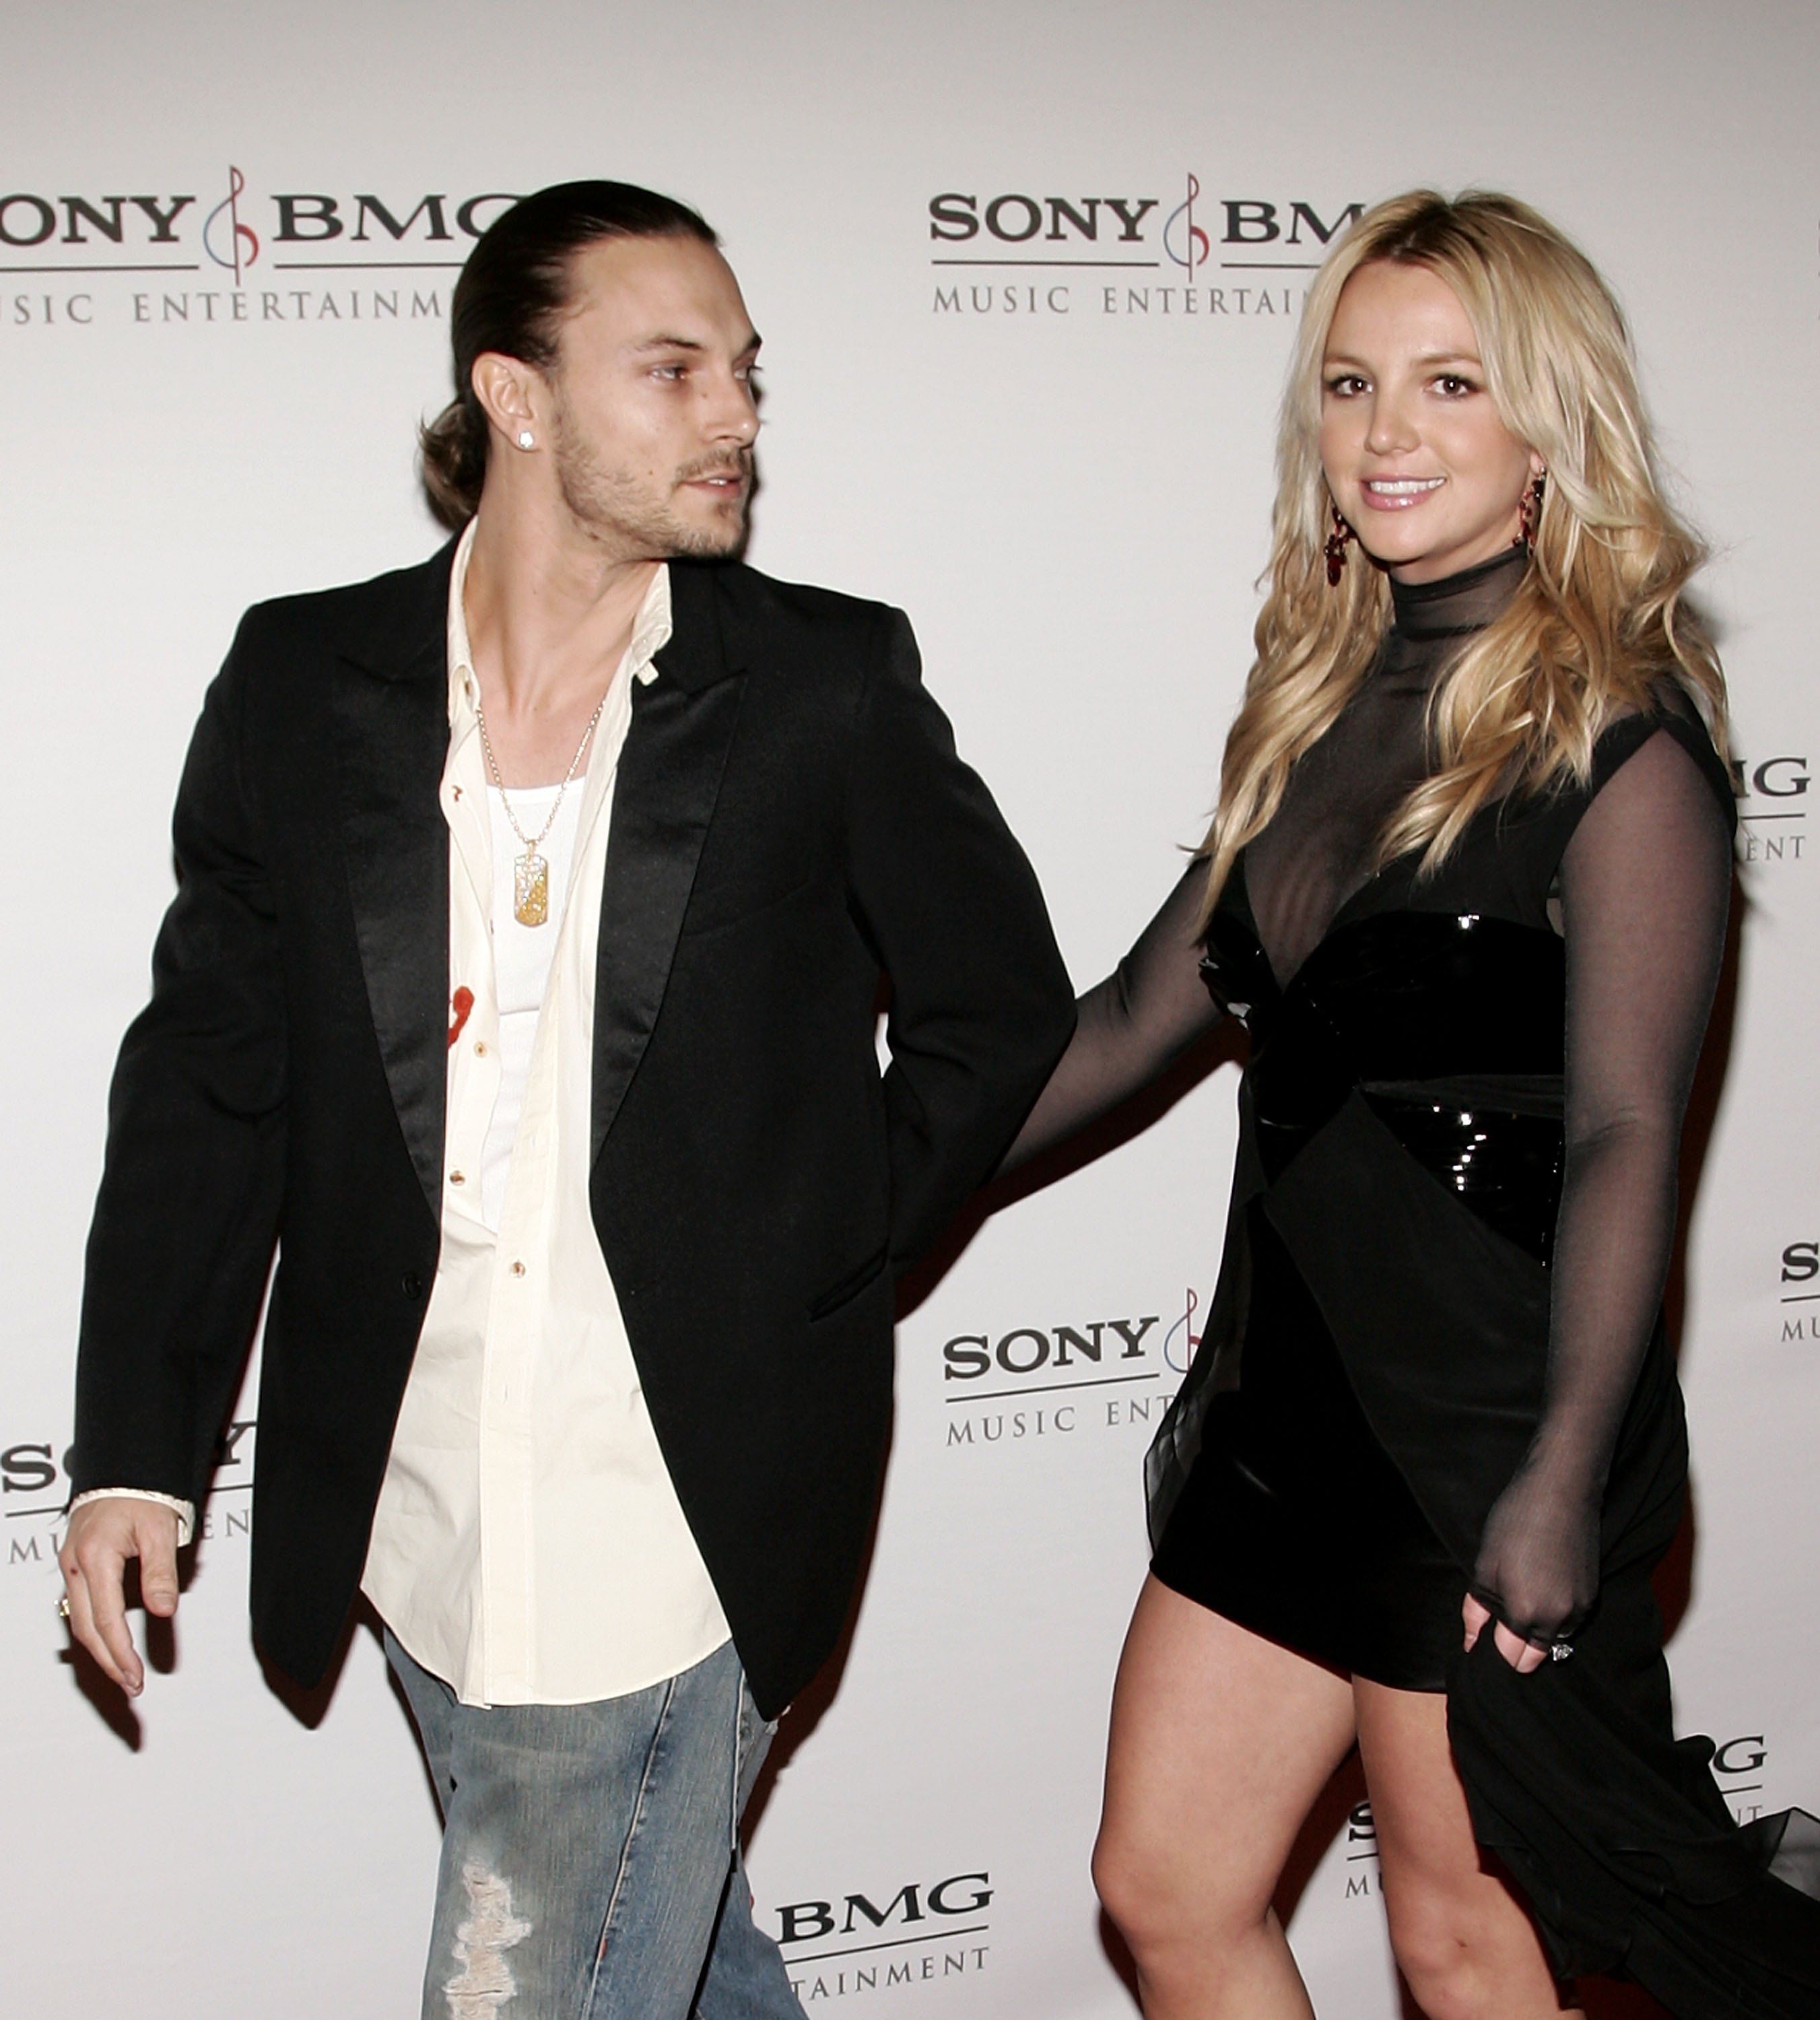  Britney Spears and husband Kevin Federline at the SONY BMG Grammy Party in 2006 in Hollywood | Source: Getty Images